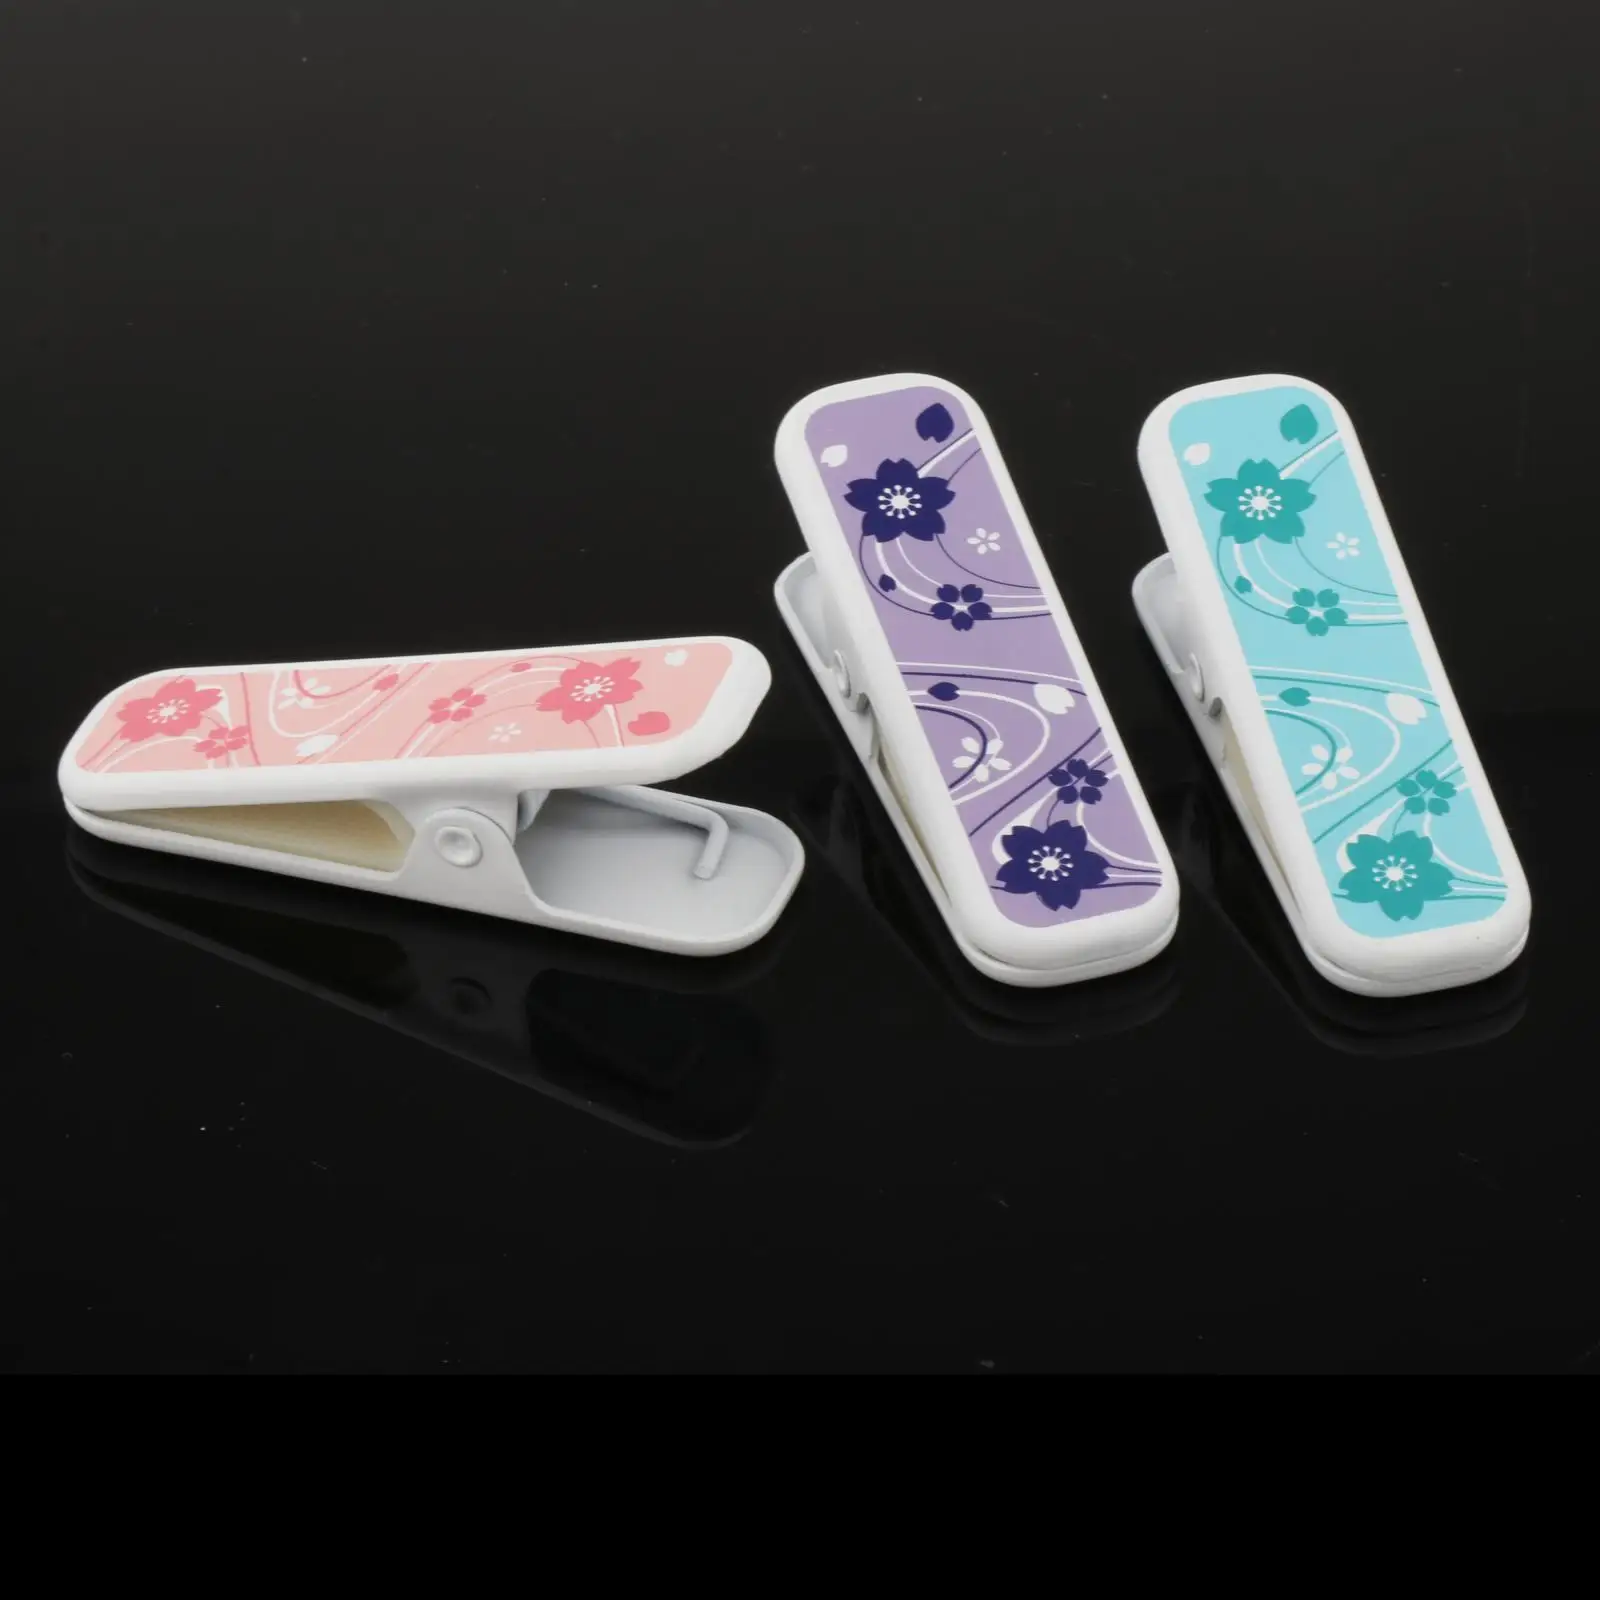 3Pcs Japanese Kimono Dressing Clips Accessories Holders for Kimono Hobbyists Even Beginners Clothing Clips Handy Perfect Gift